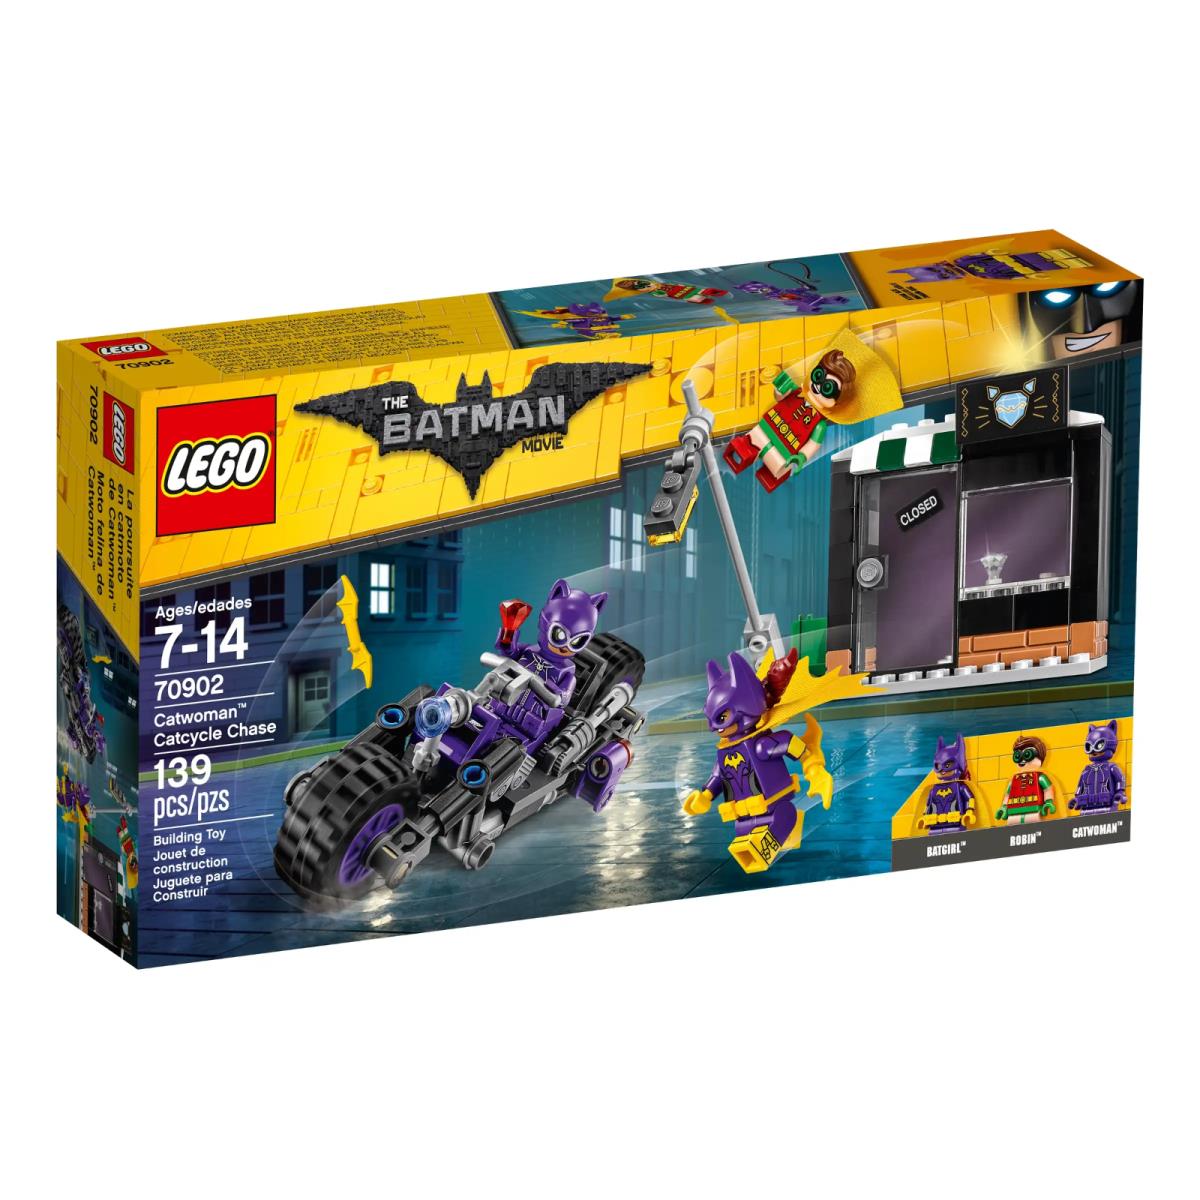 Lego The Batman Movie 70902 Catwoman Catcycle Chase